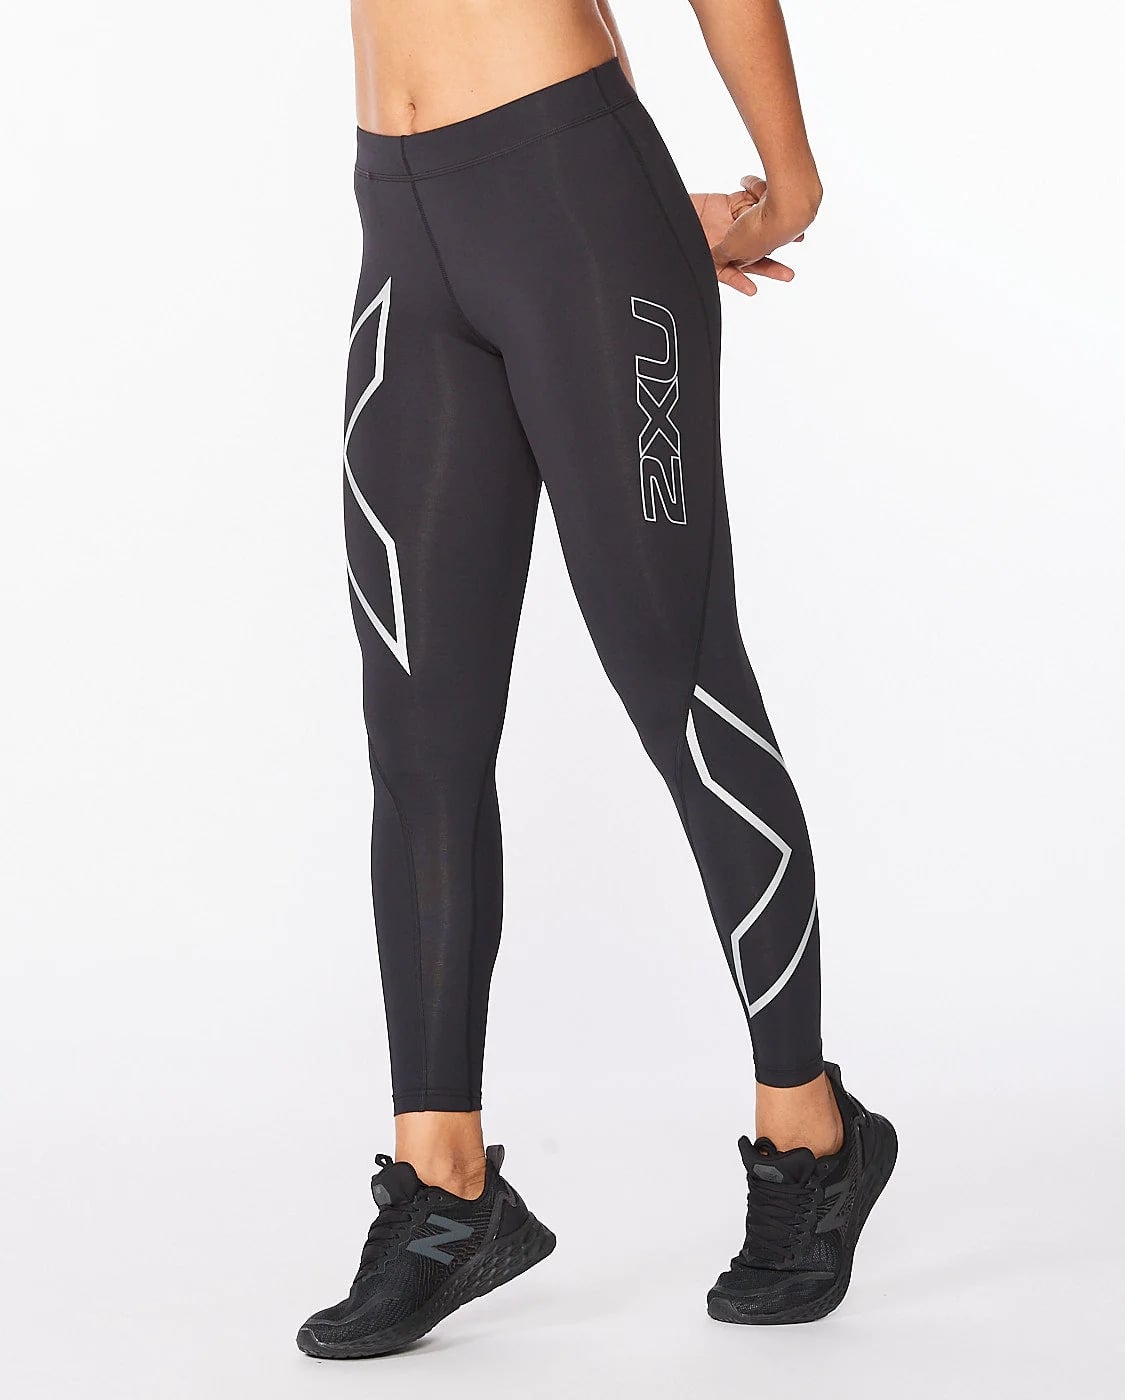  2XU Women's Elite Power Recovery Compression Tights